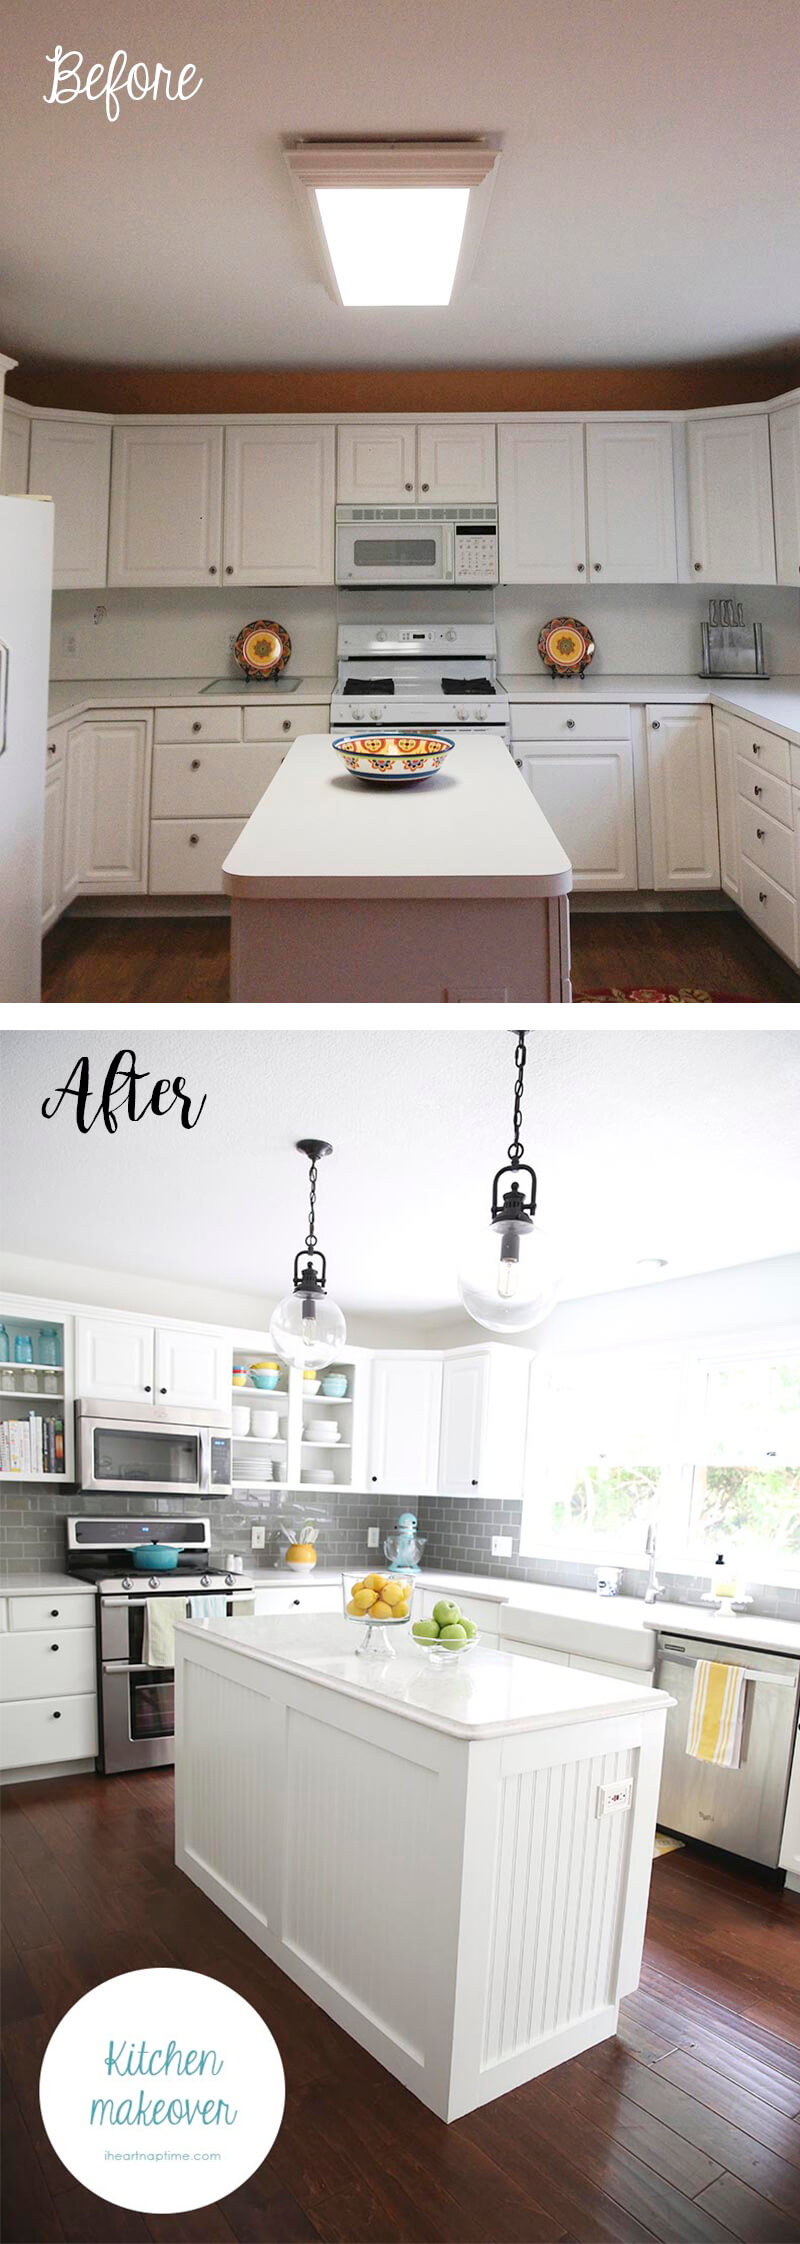 20+ Budget friendly Kitchen Makeover Ideas and Designs for 20